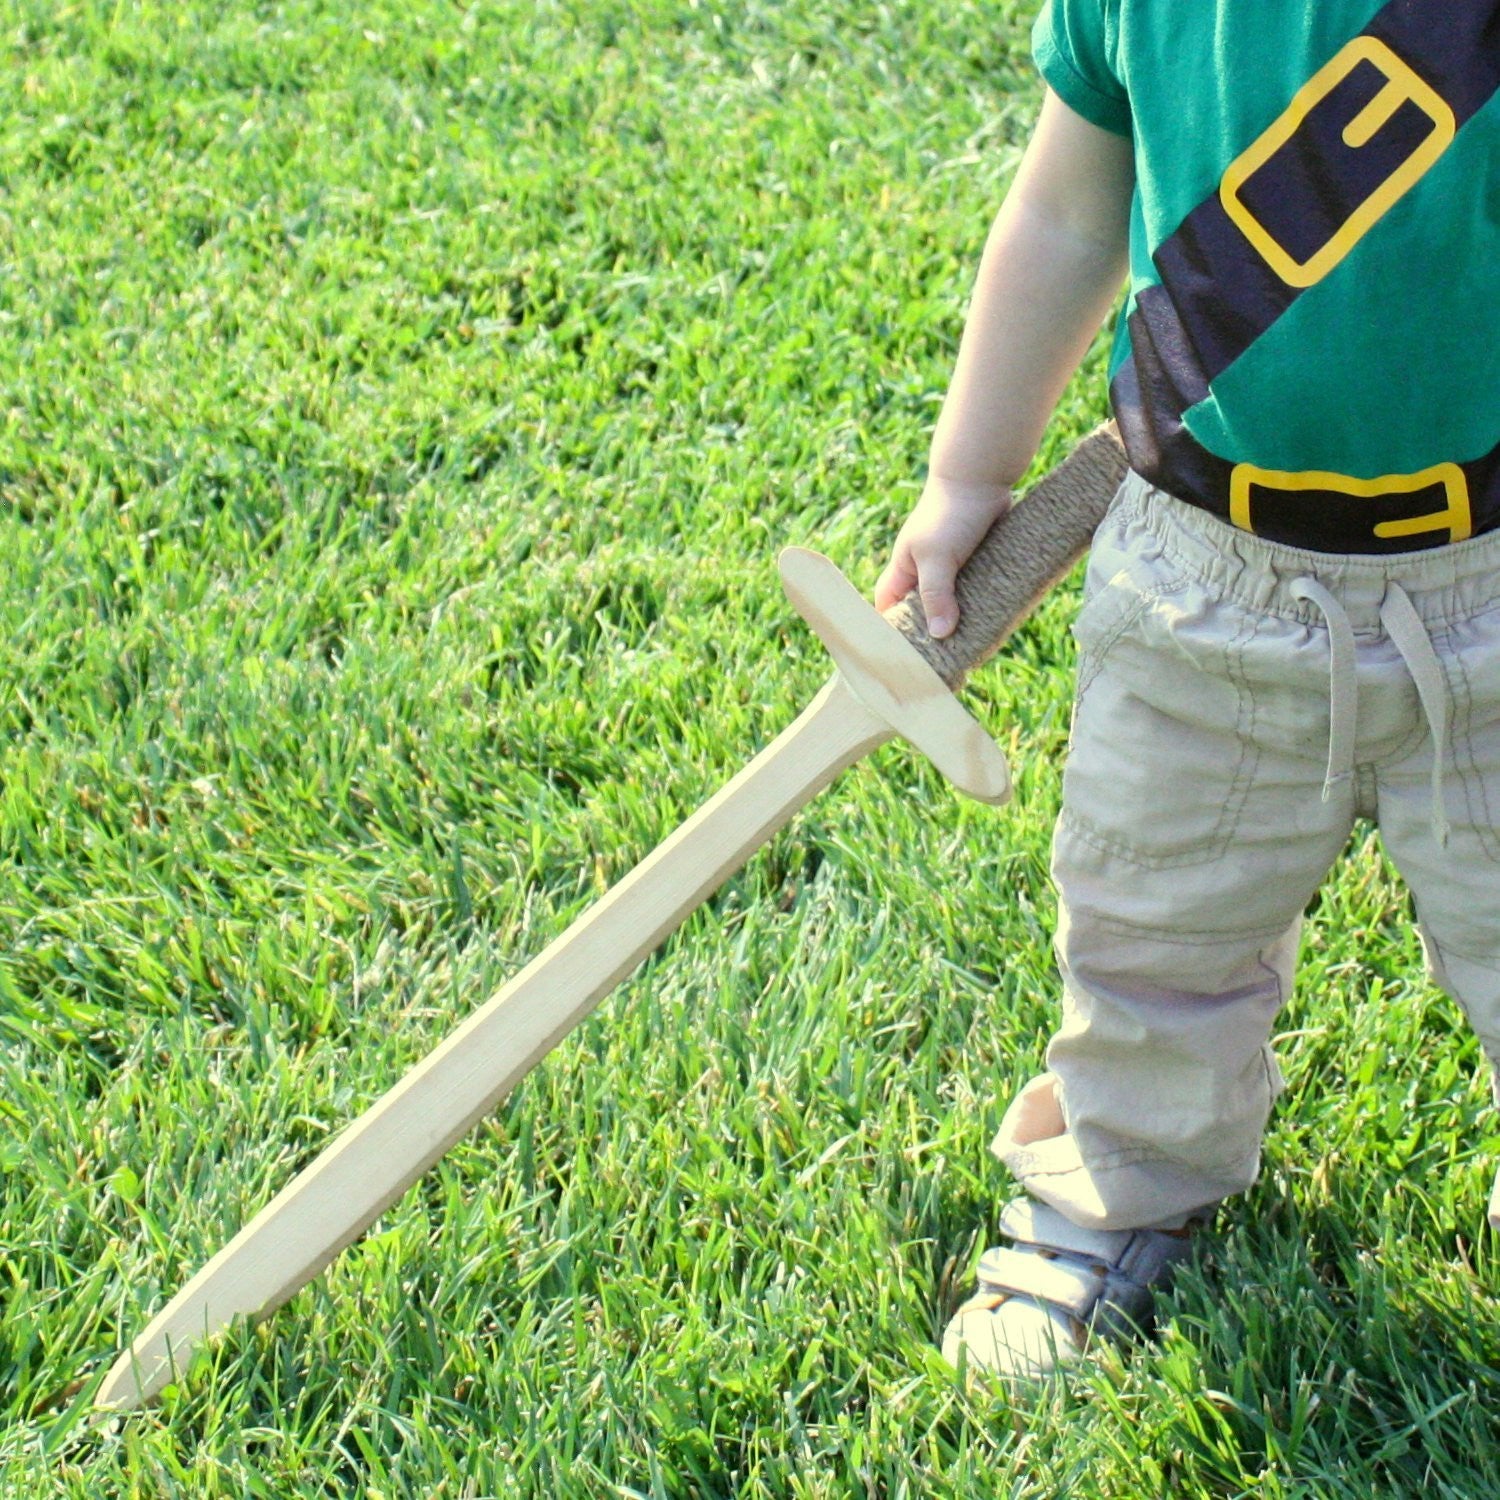 Wooden Toy Swords With Twine Wrapped Handle 2-Pack